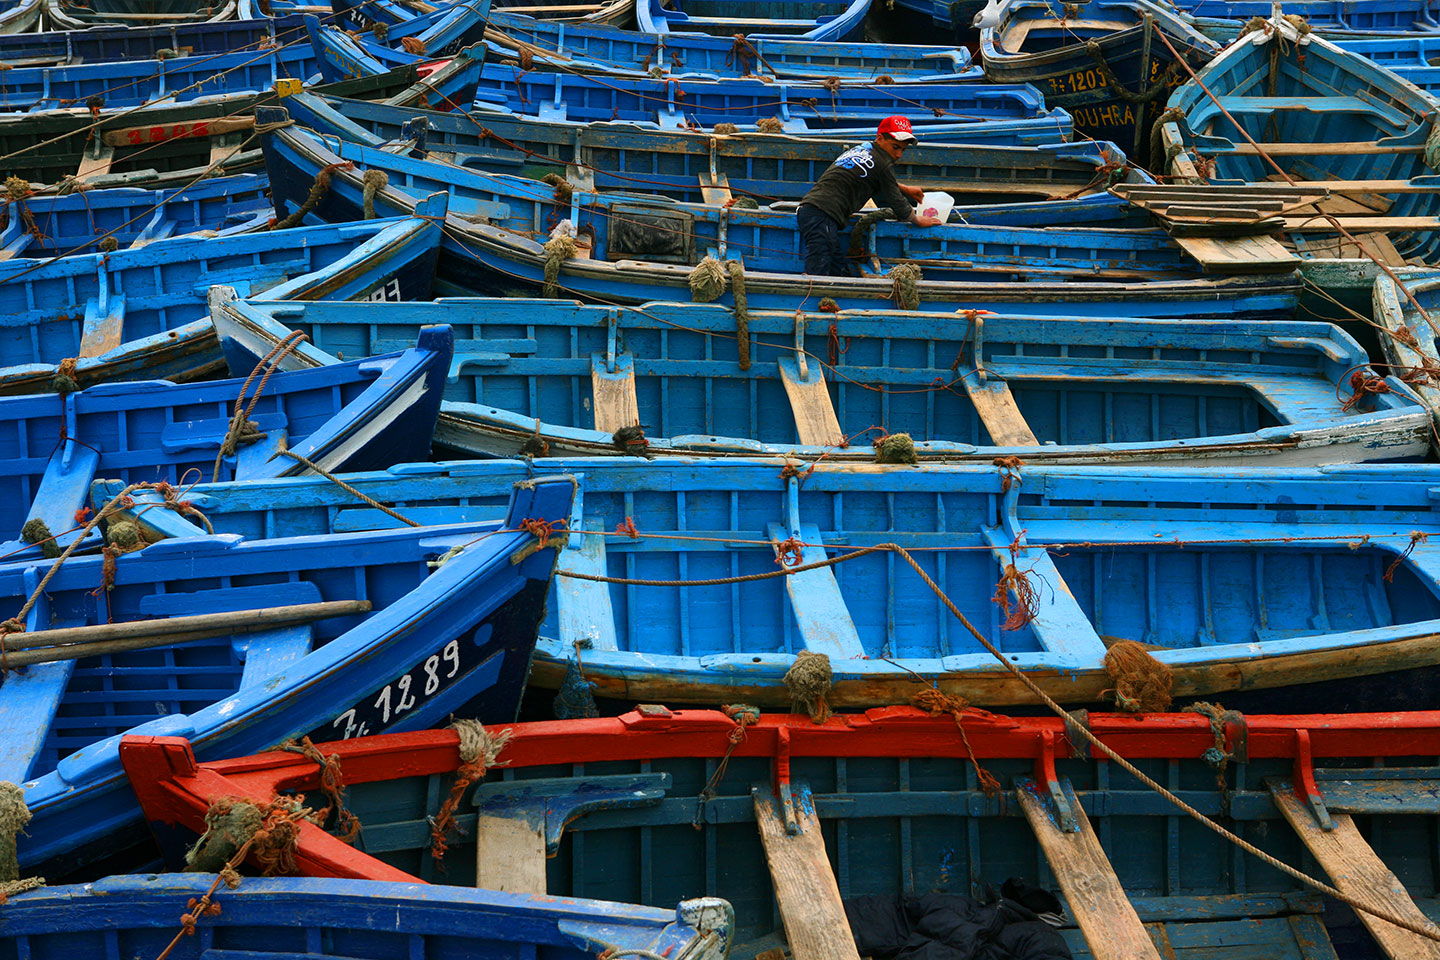 Blue boats in the harbor of Essaouira, Morocco